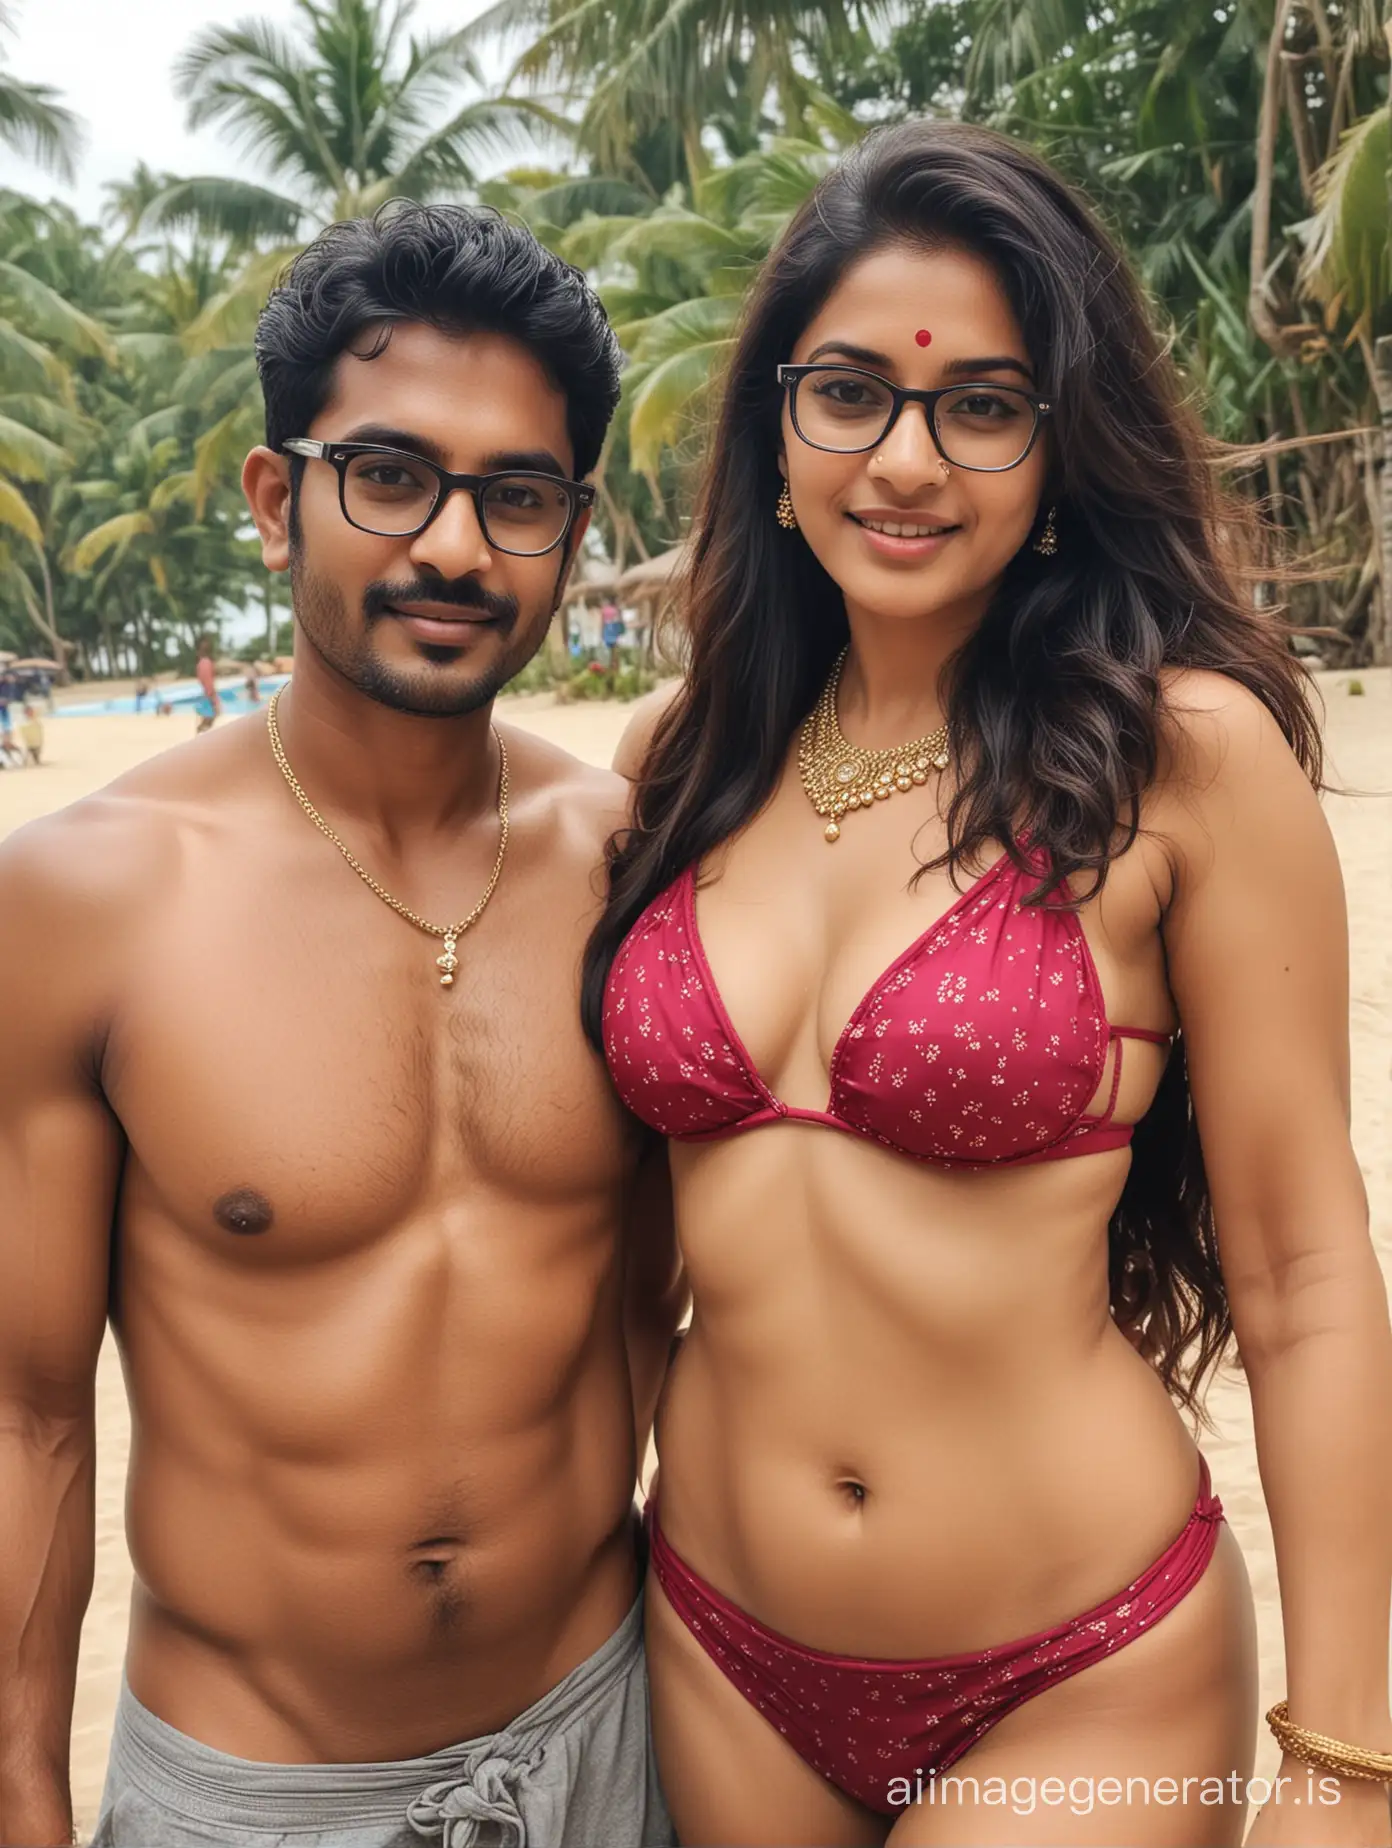 Hot South Indian husband wearing specs wife in bikini and jewellery without specs